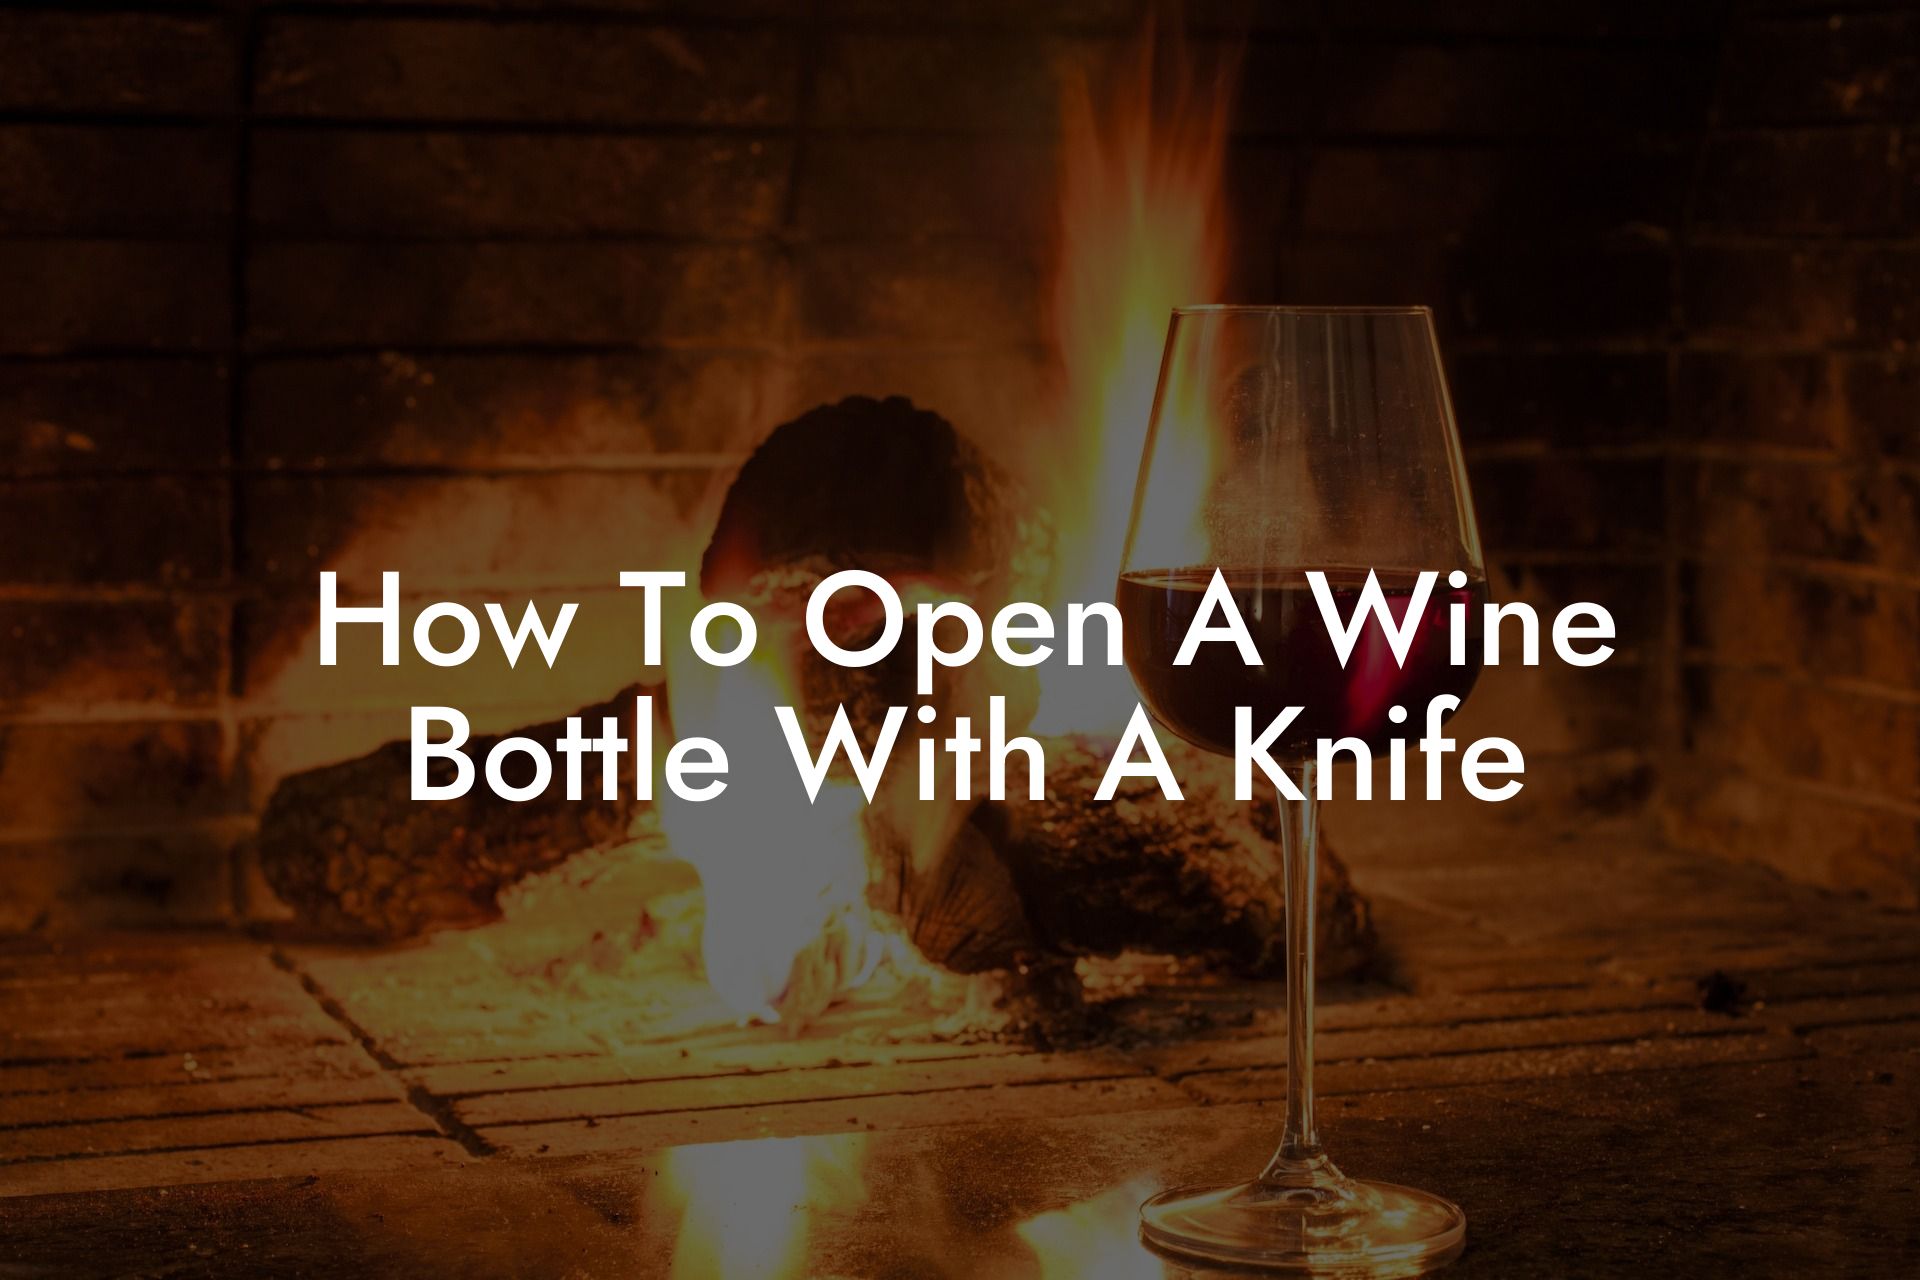 How To Open A Wine Bottle With A Knife